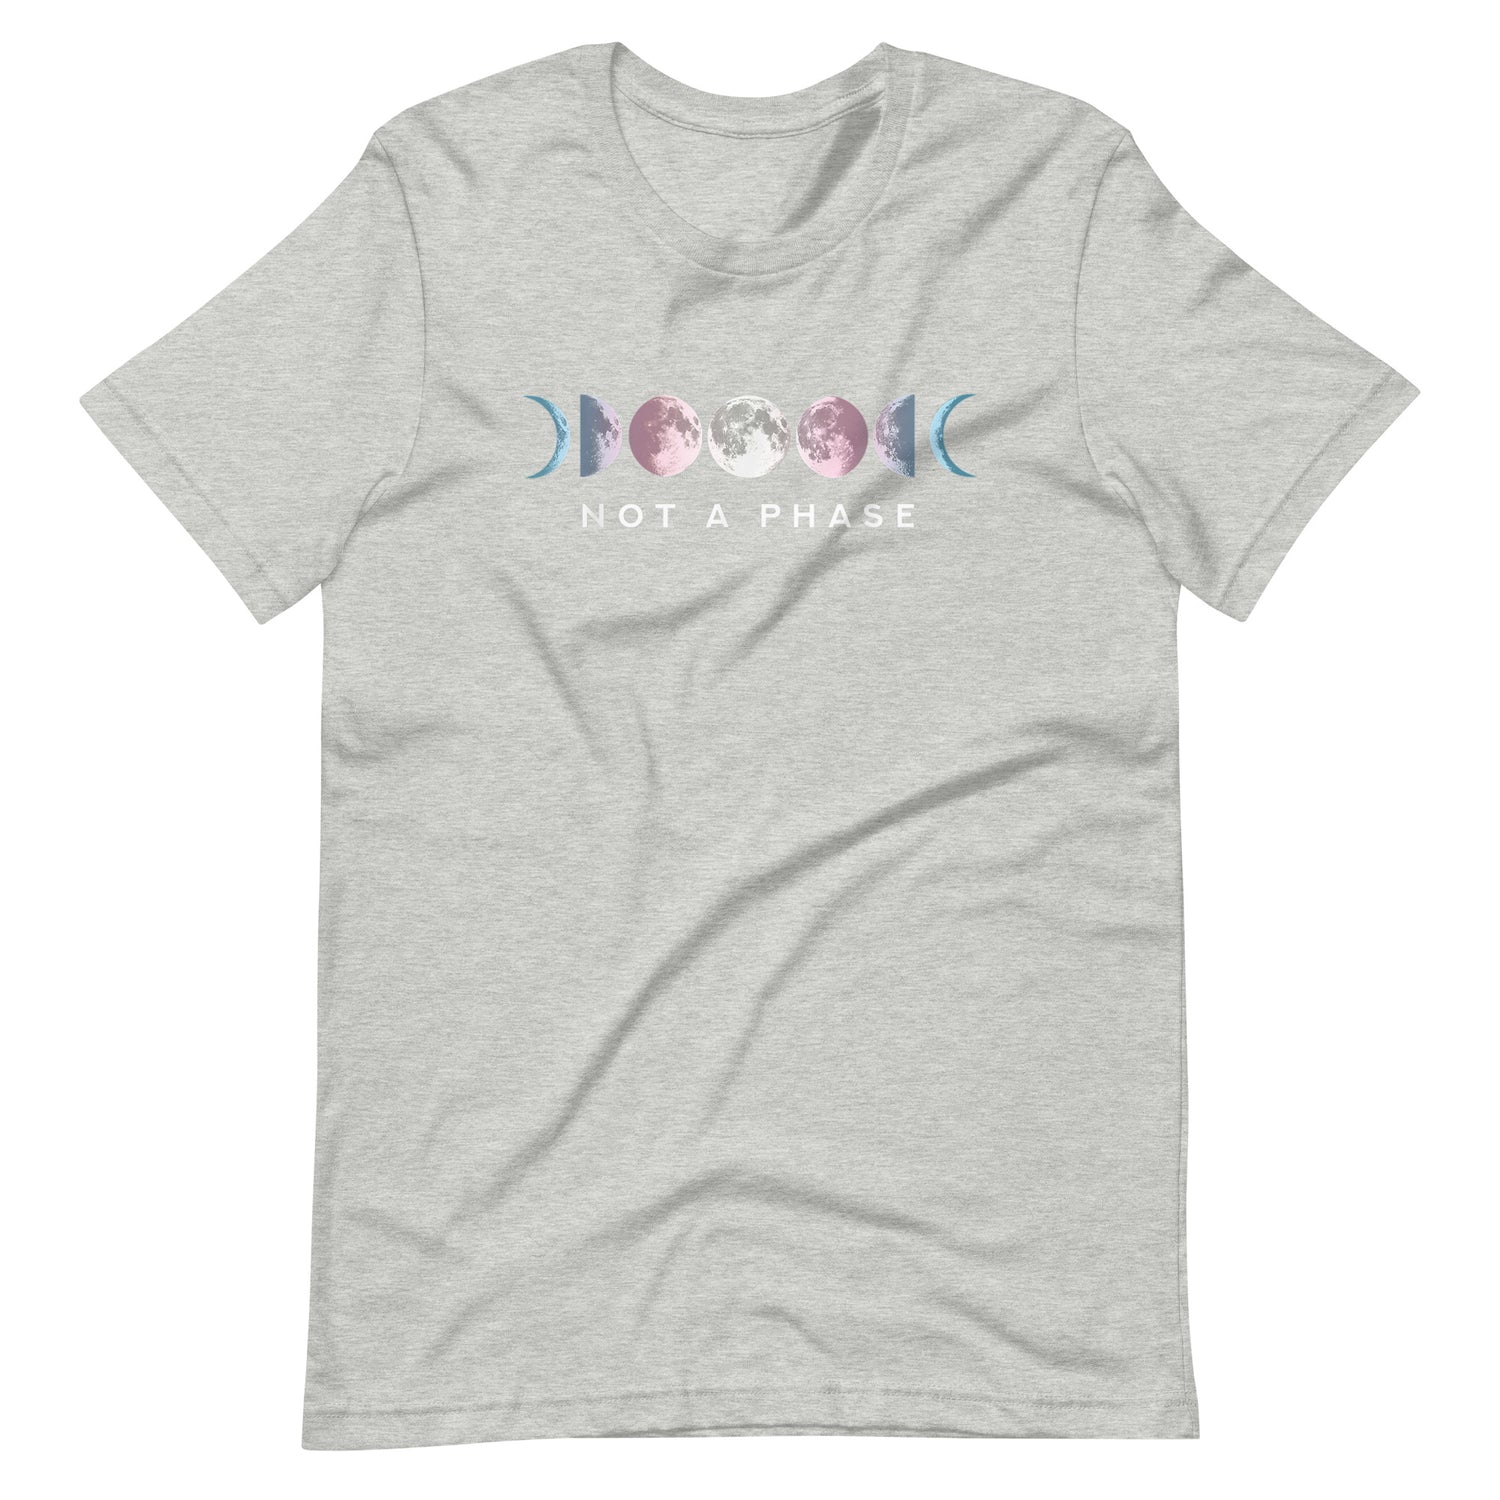 Not a Phase Transsexual Flag T-Shirt - gay pride apparel